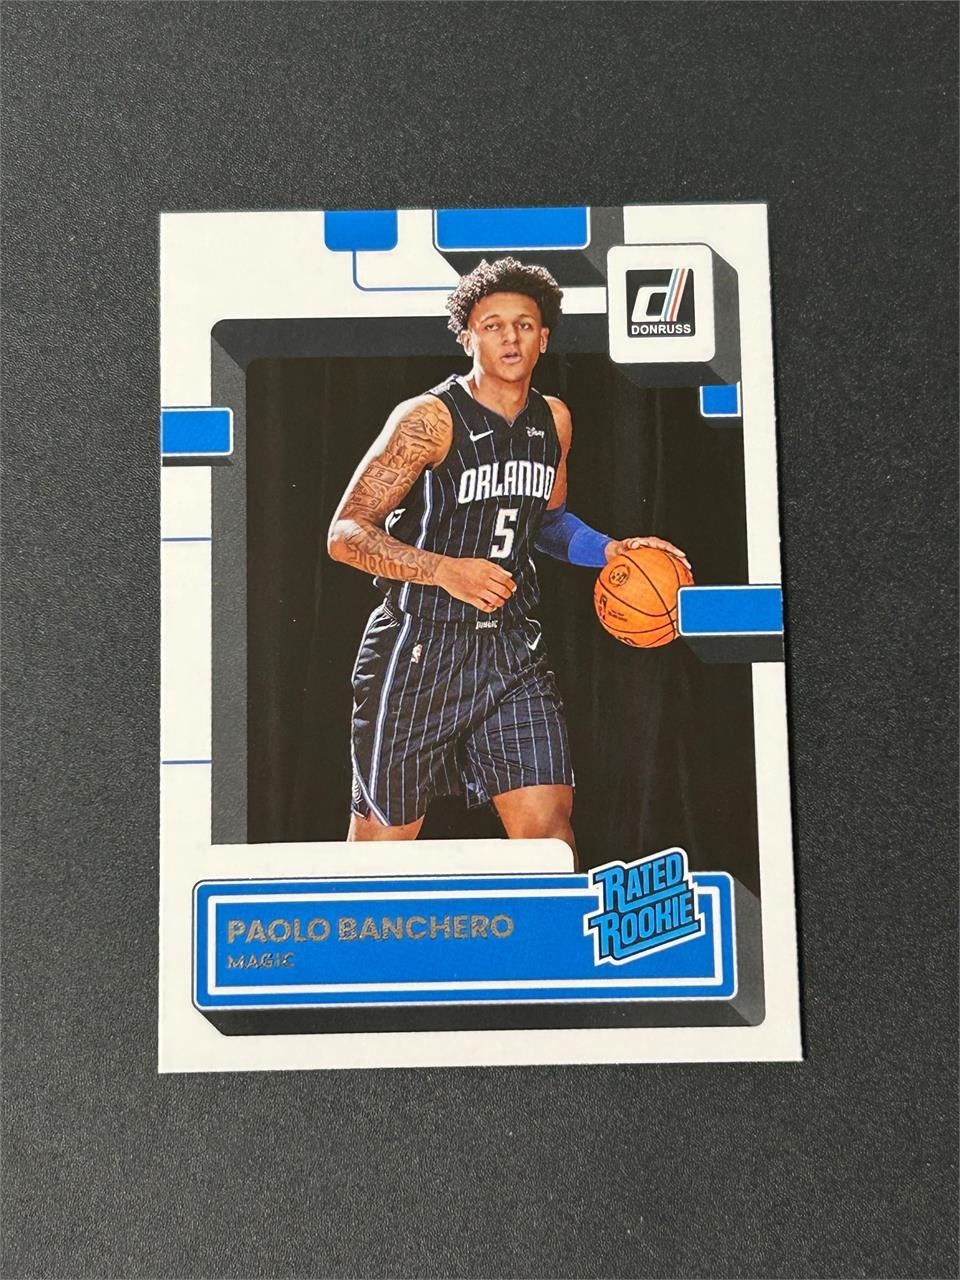 2022 Donruss Paolo Banchero Rated Rookie